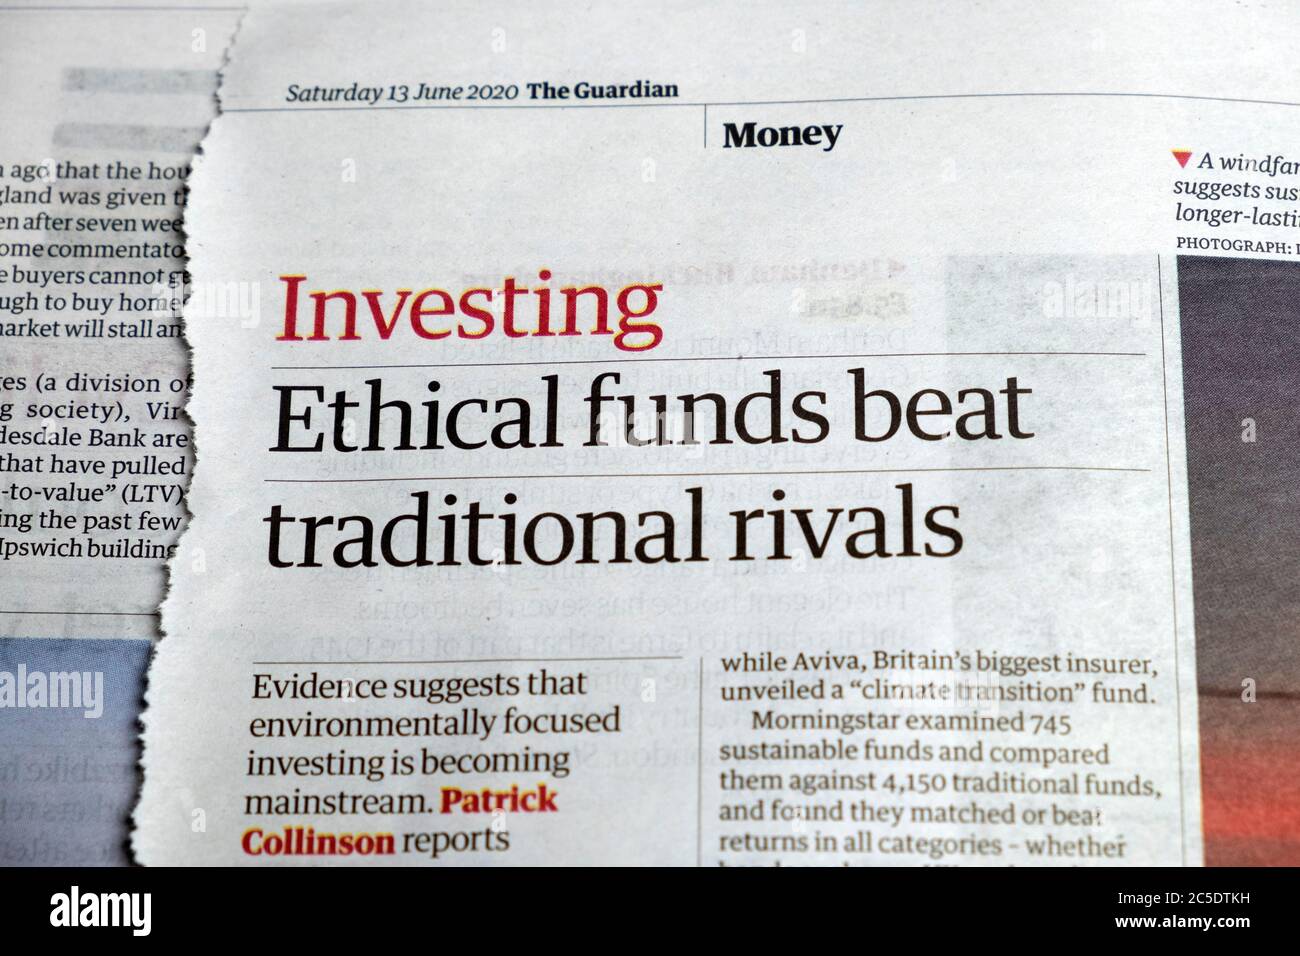 Newspaper article in Money section of The Guardian paper 'Investing Ethical funds beat traditional rivals'  13 June 2020 London England  UK Stock Photo